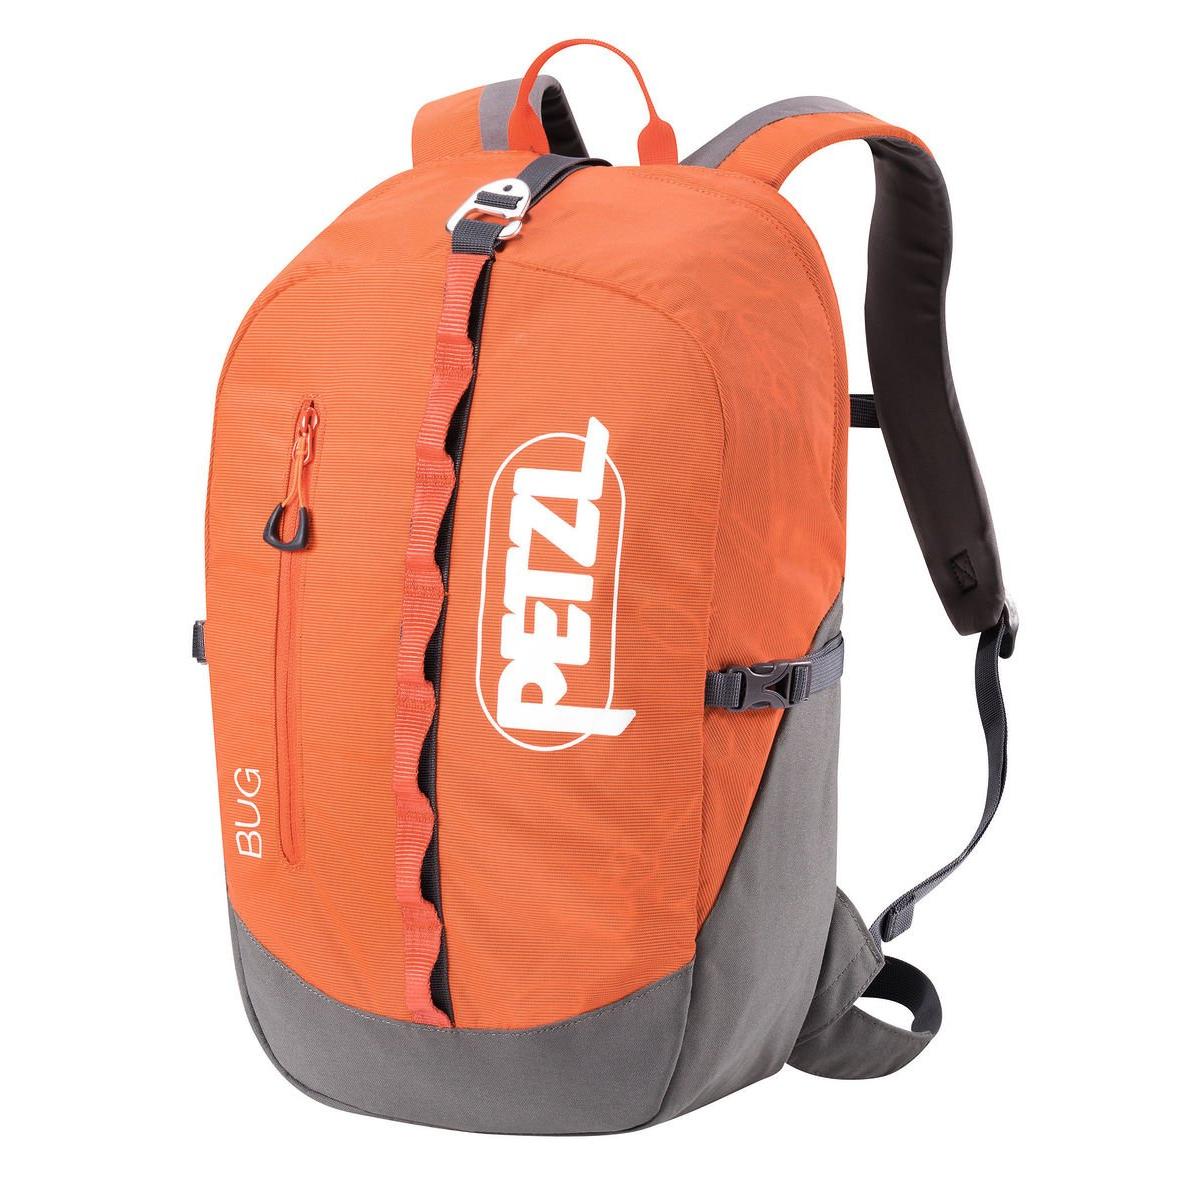 Petzl Charlet Bug Climbing Backpack - Red